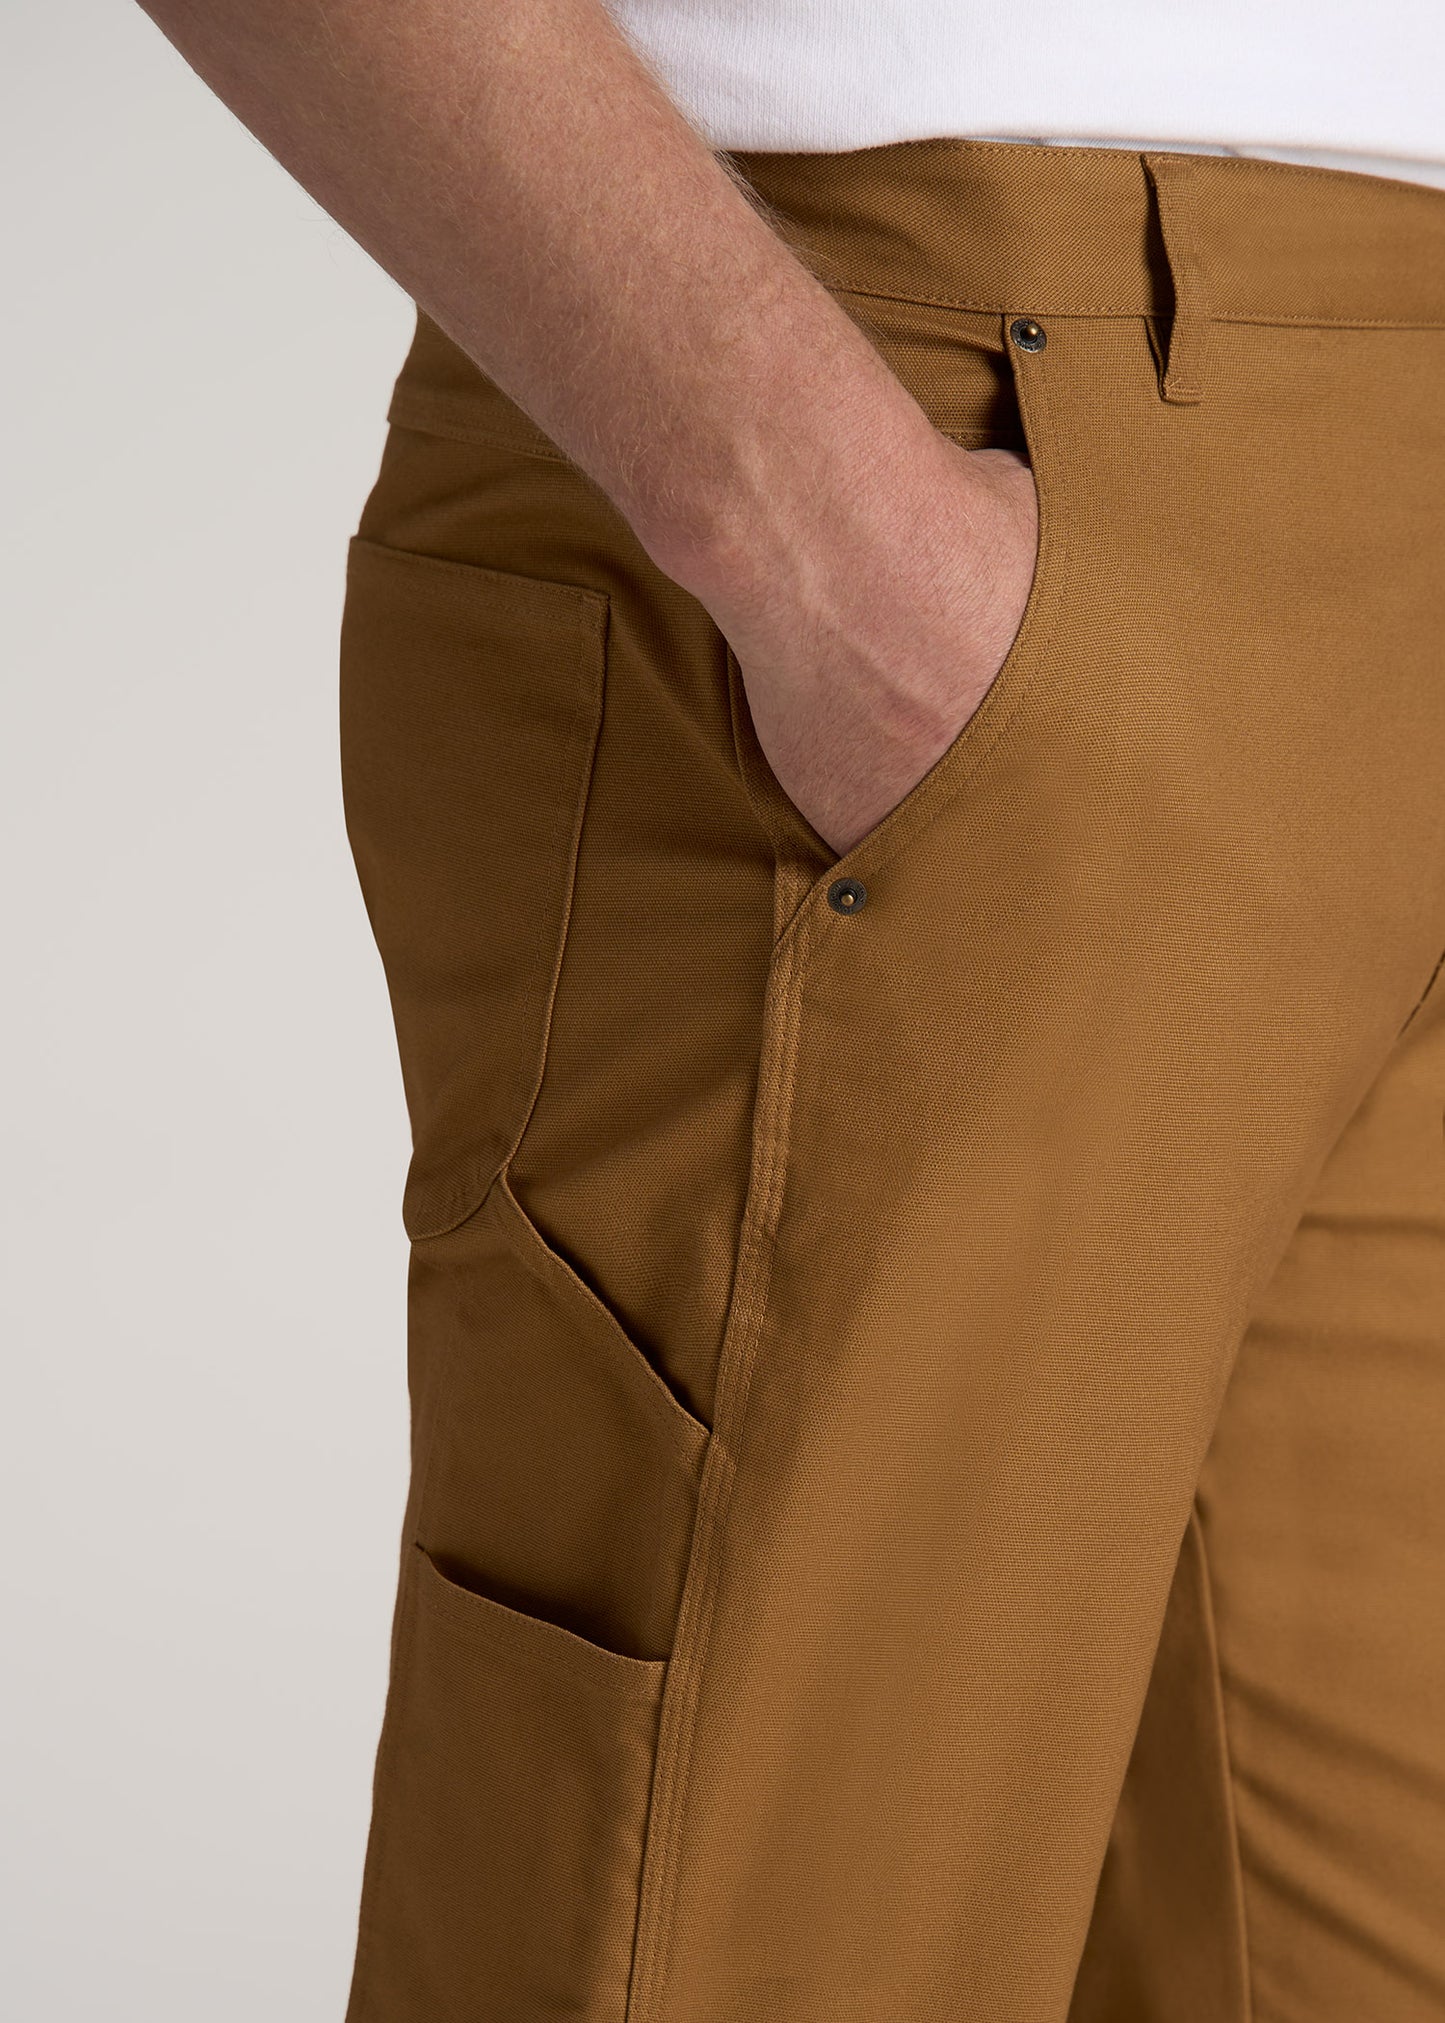 LJ&S Stretch Canvas REGULAR-FIT Carpenter’s Pants for Tall Men in Dusty Brown